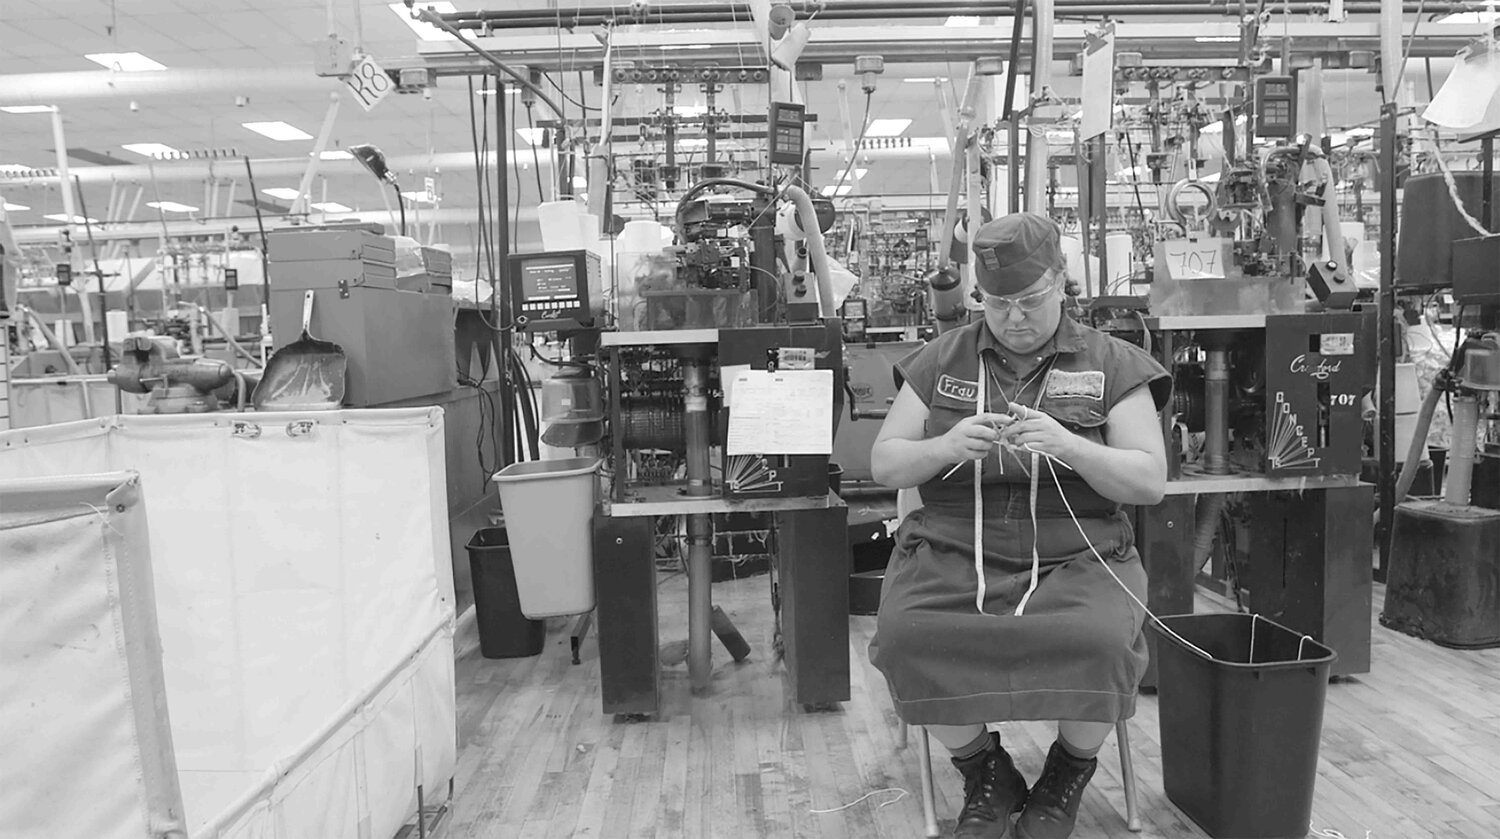 A woman knitting in a factory